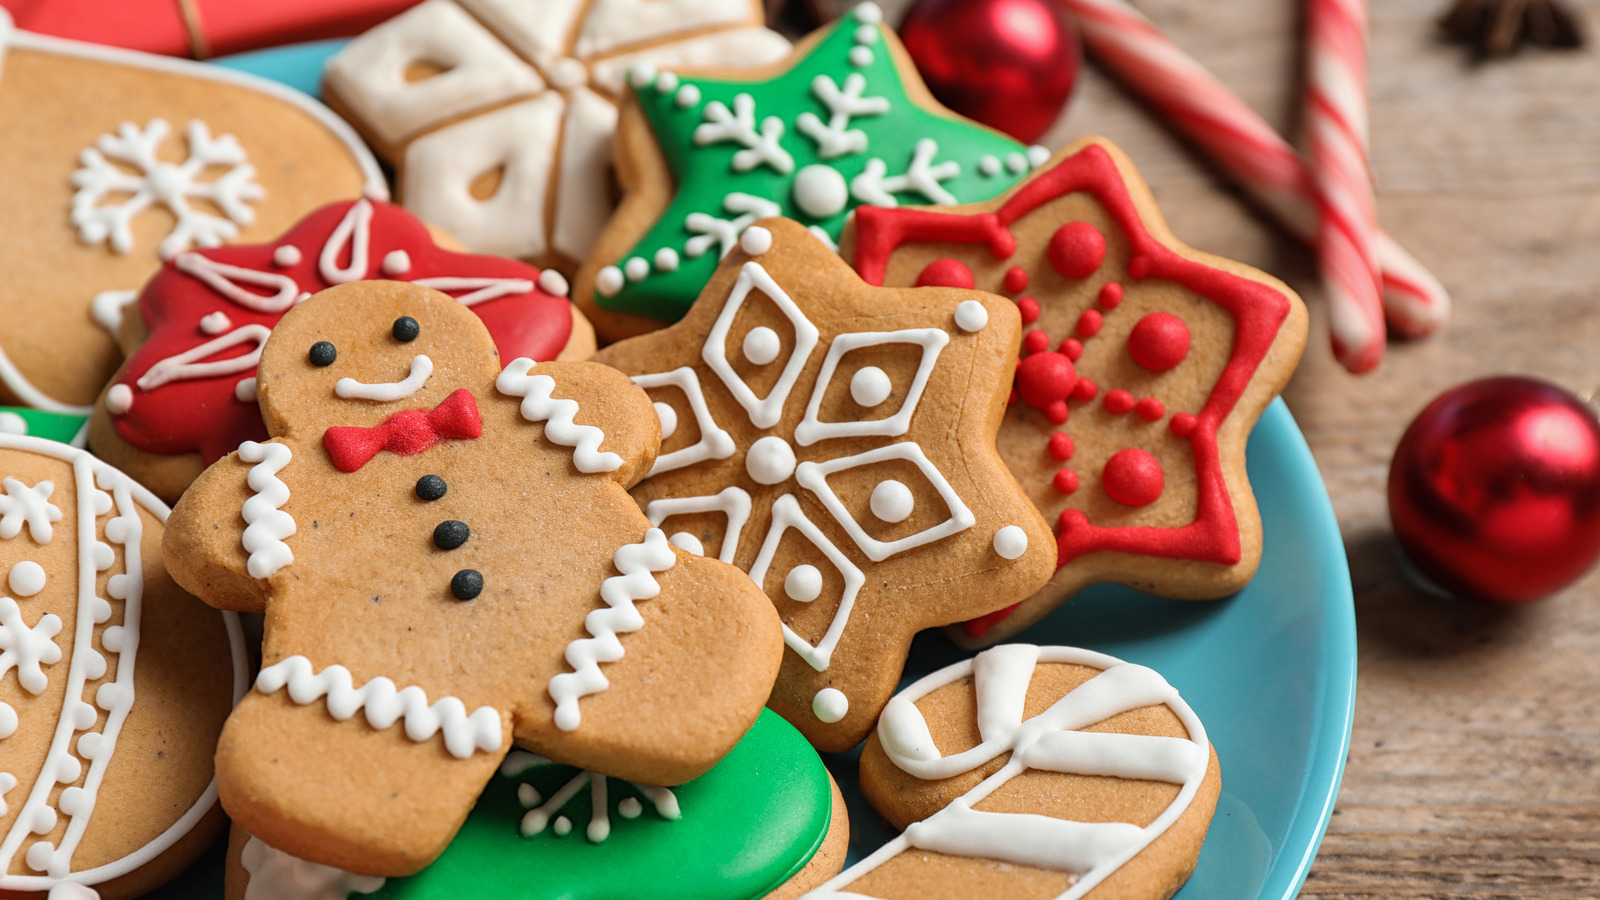 Can We Actually Guess the 😃 Mood You Are in RN Based on the Foods You Wanna Have? Holiday cookies